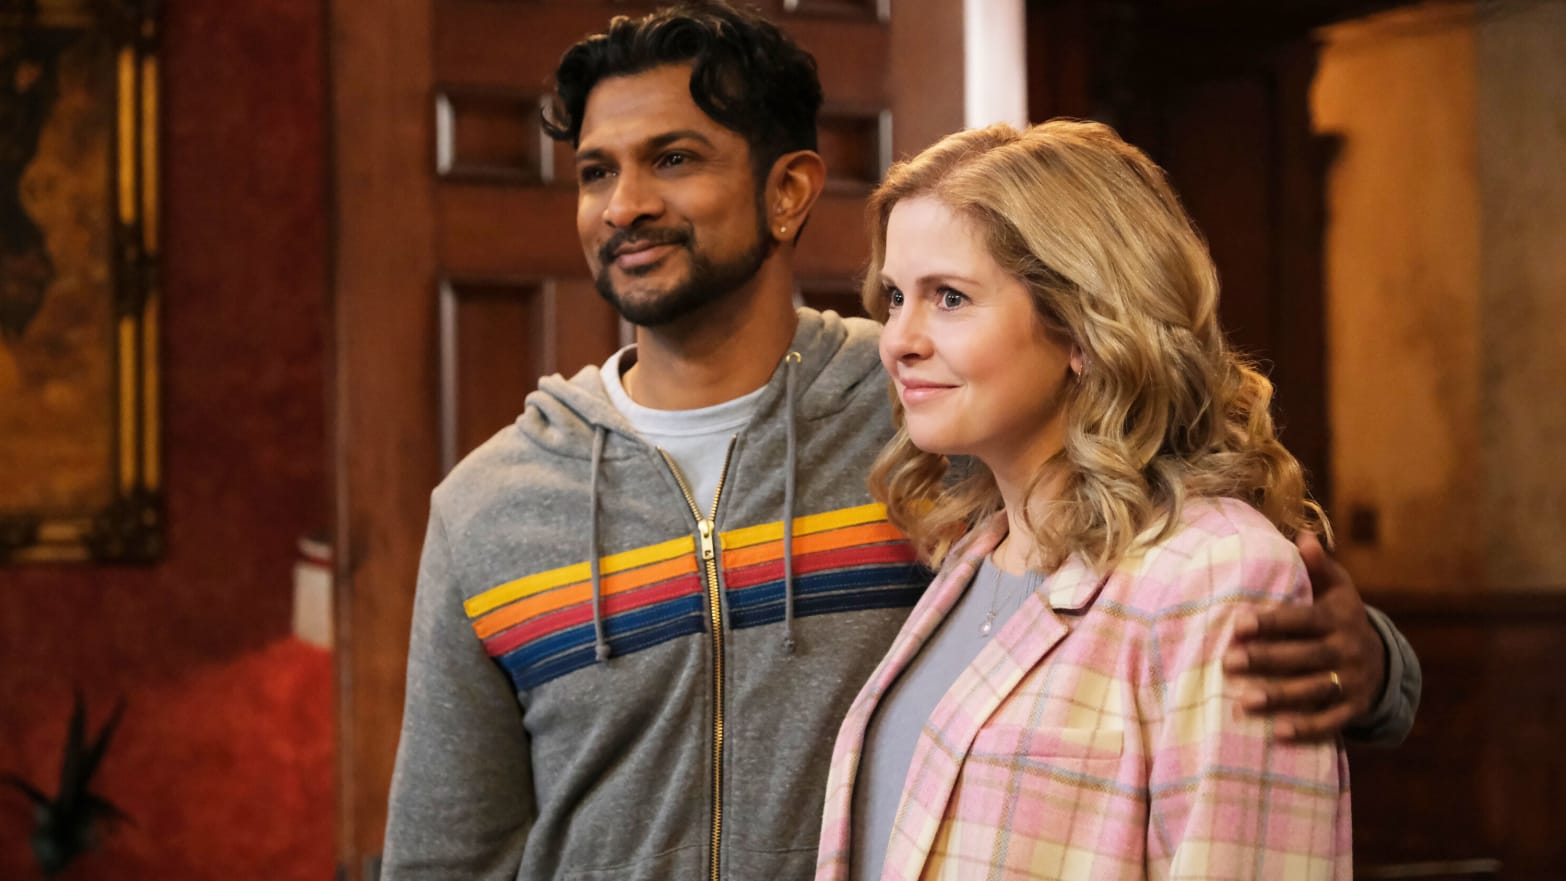 A photo including Utkarsh Ambudkar as Jay and Rose McIver as Samantha in the series Ghosts on CBS